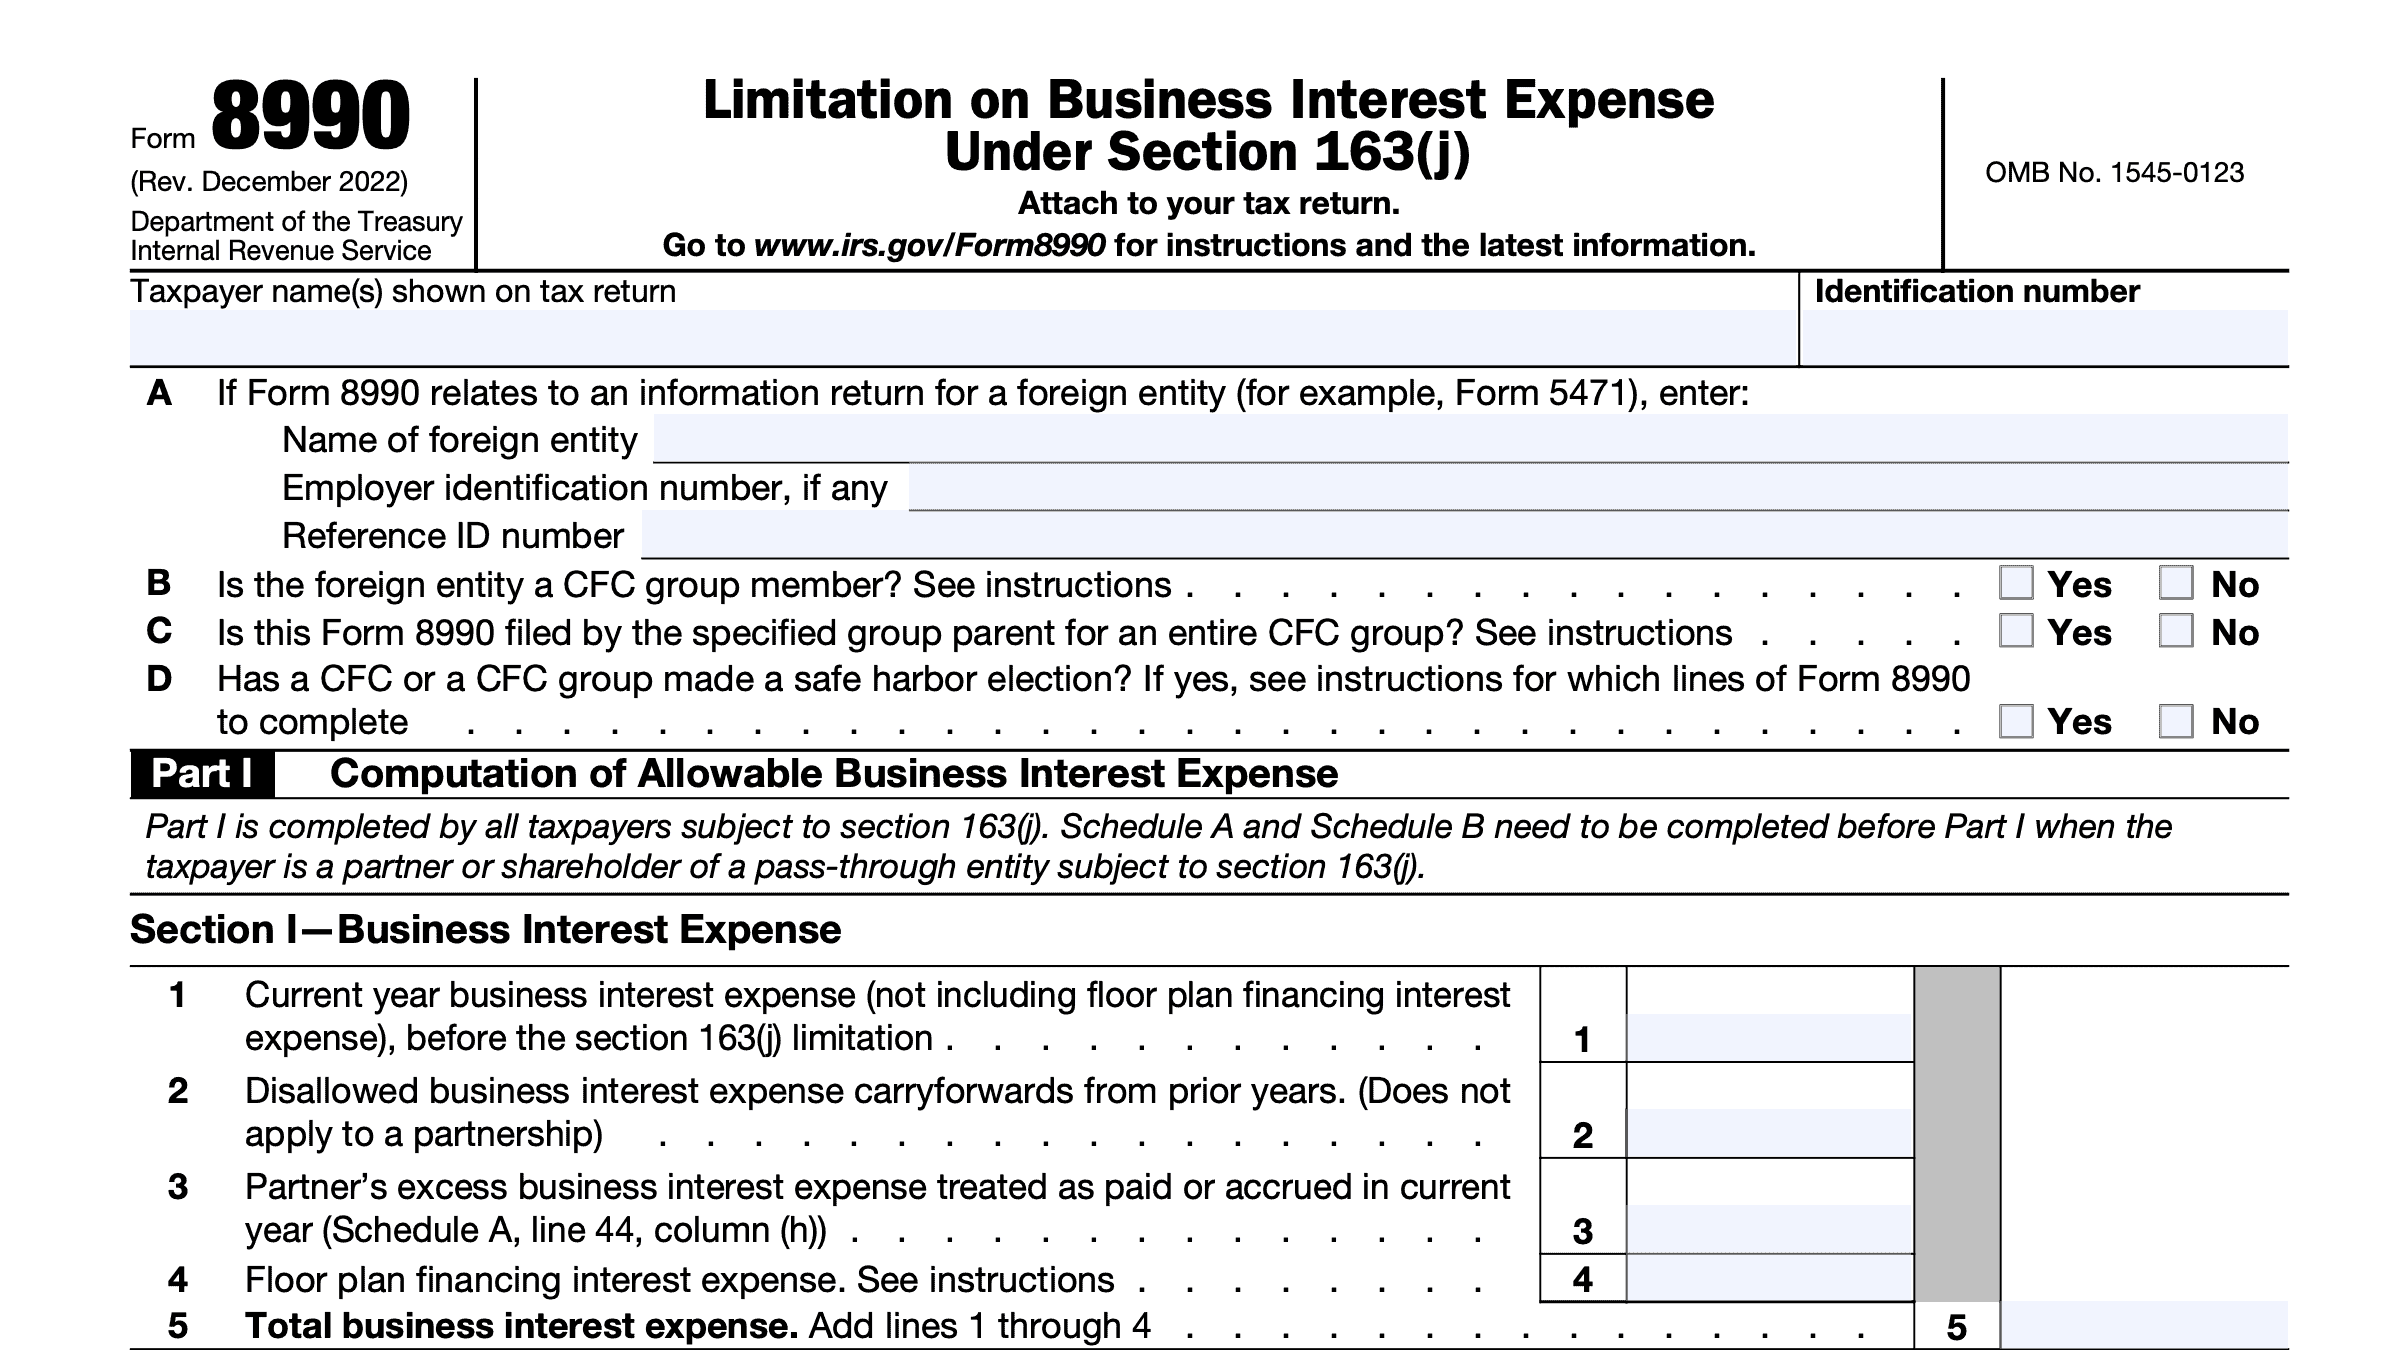 IRS Form 8990 Instructions Business Interest Expense Limitation